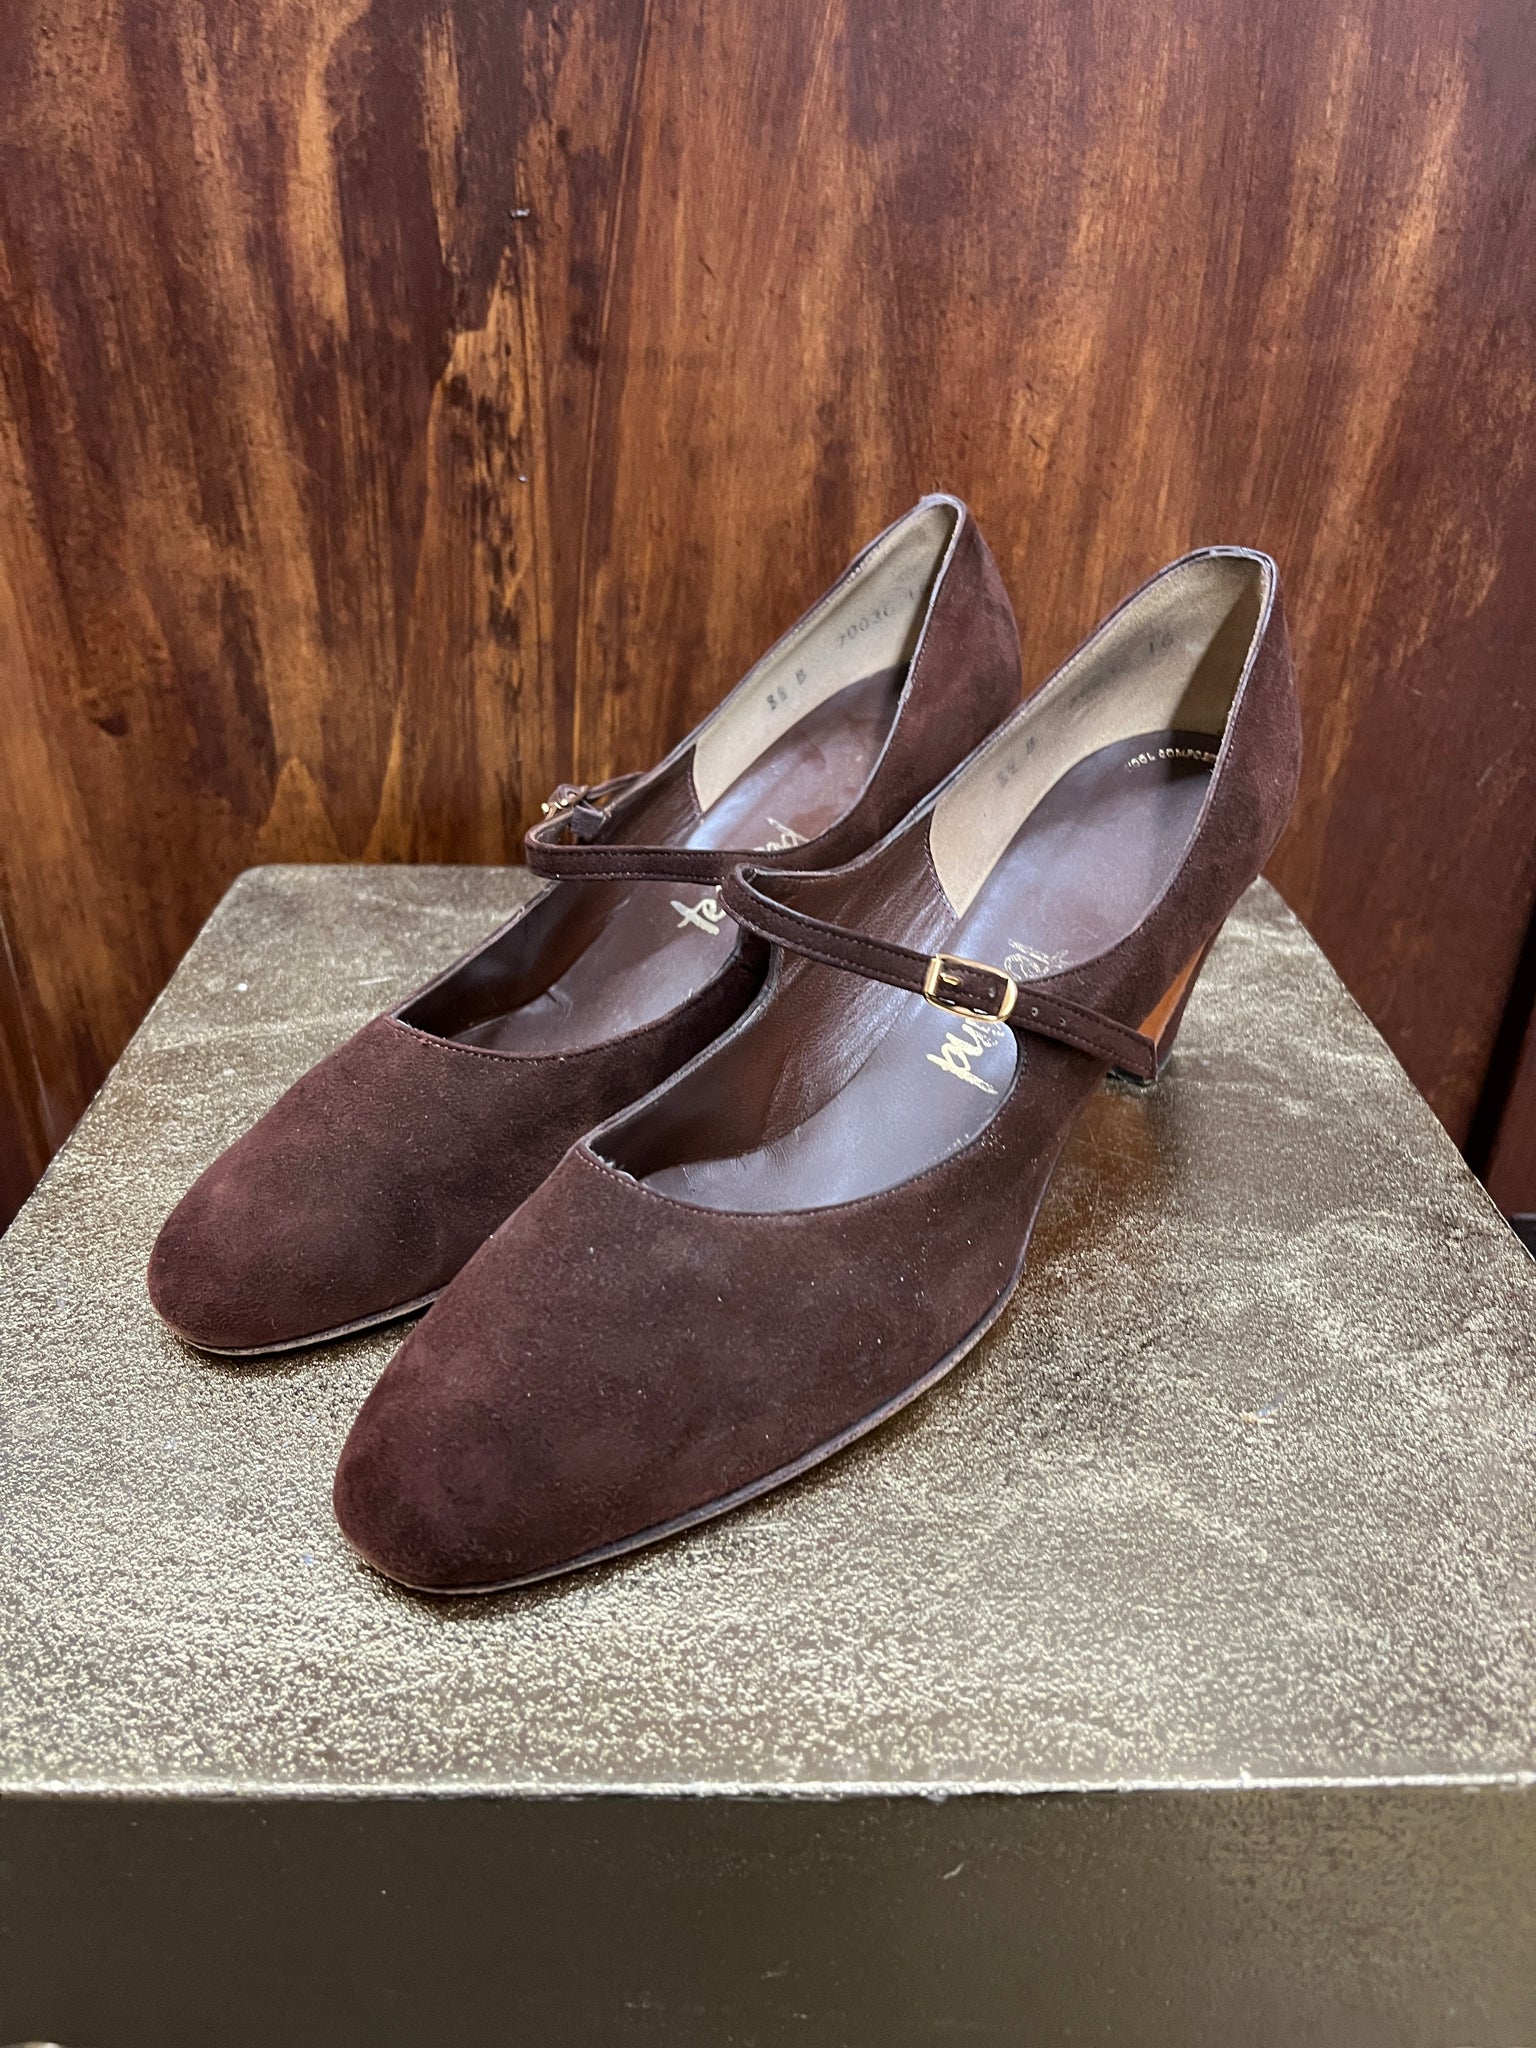 1960s SHOES - Ted Land- brown suede pumps with straps